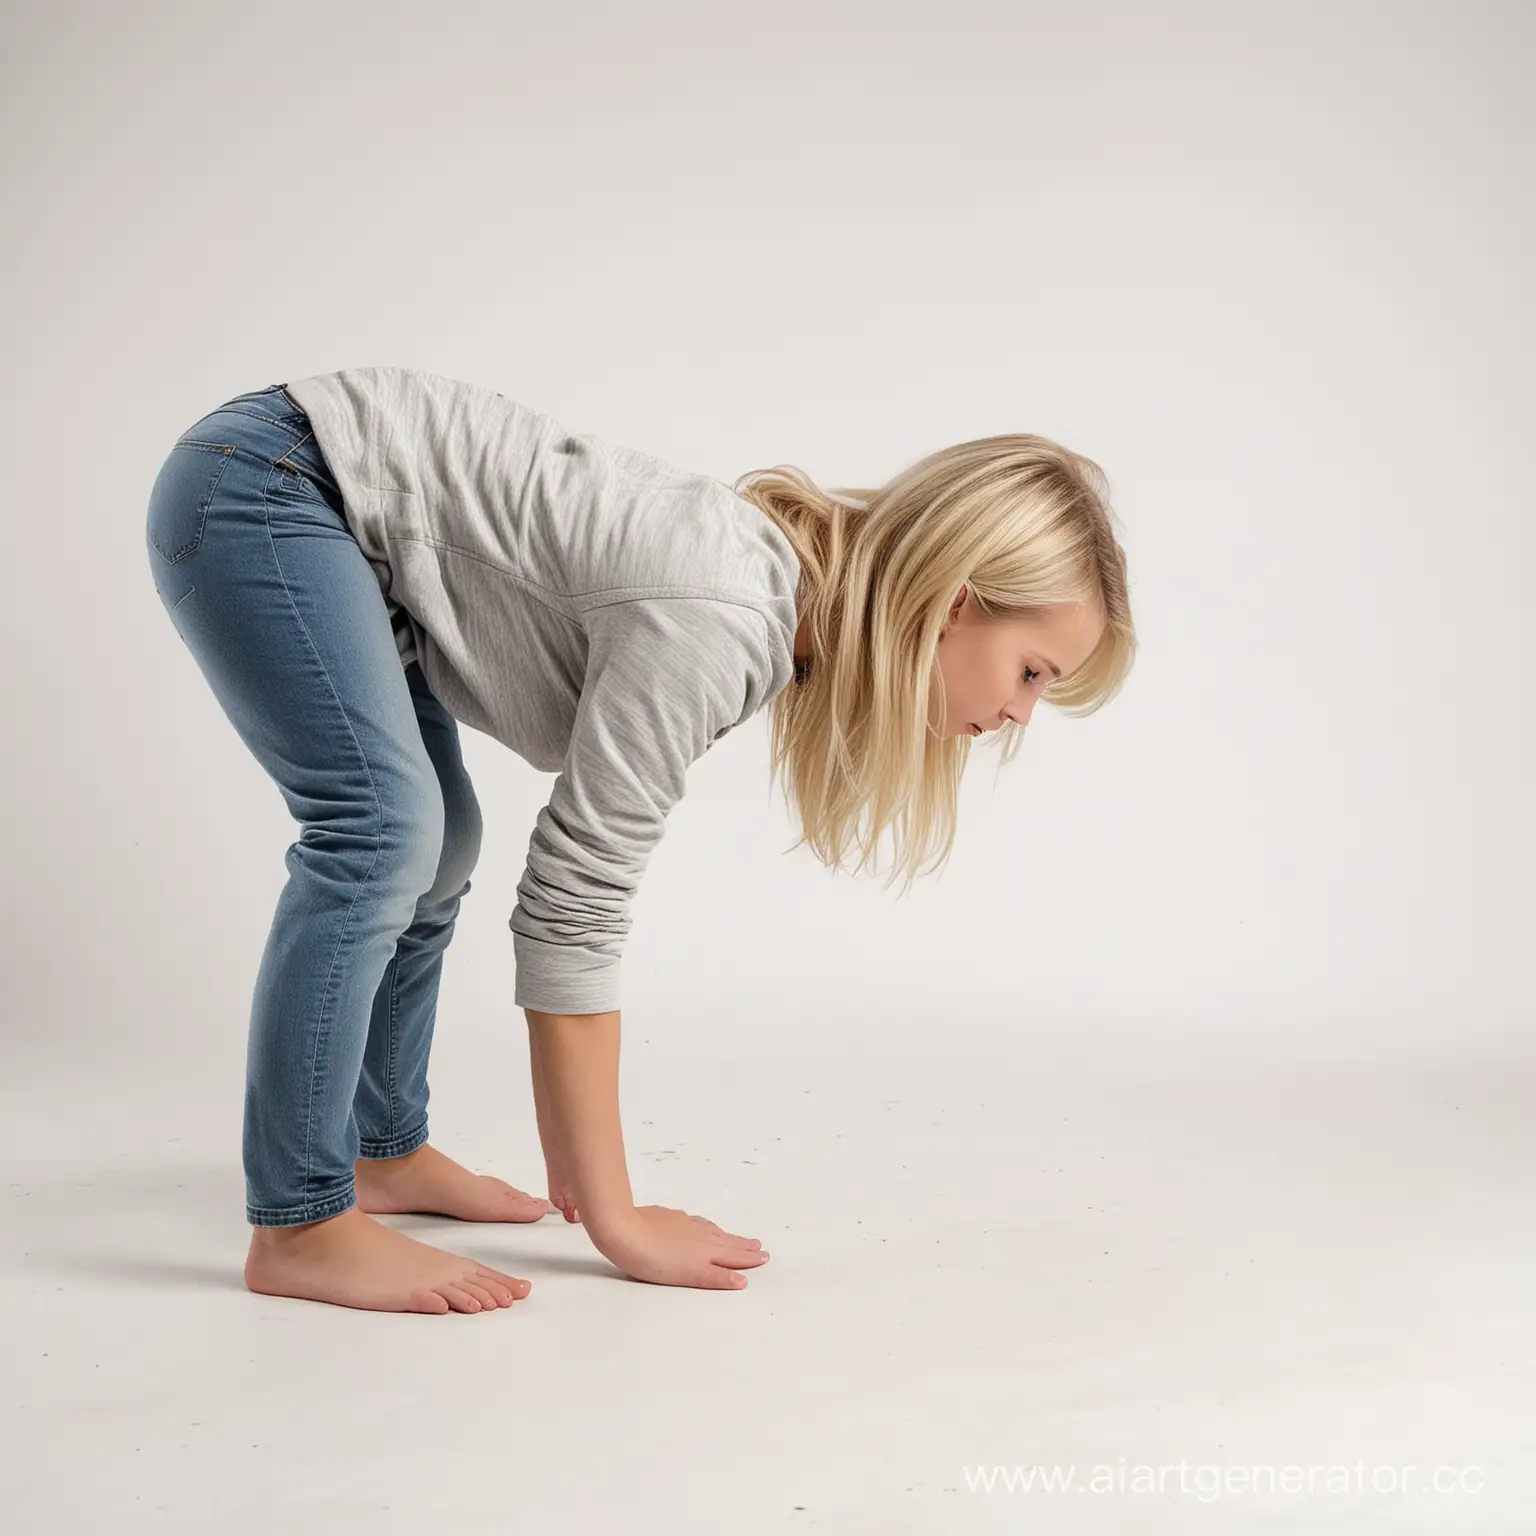 A young blonde girl walking on all fours, seen in profile, white background.